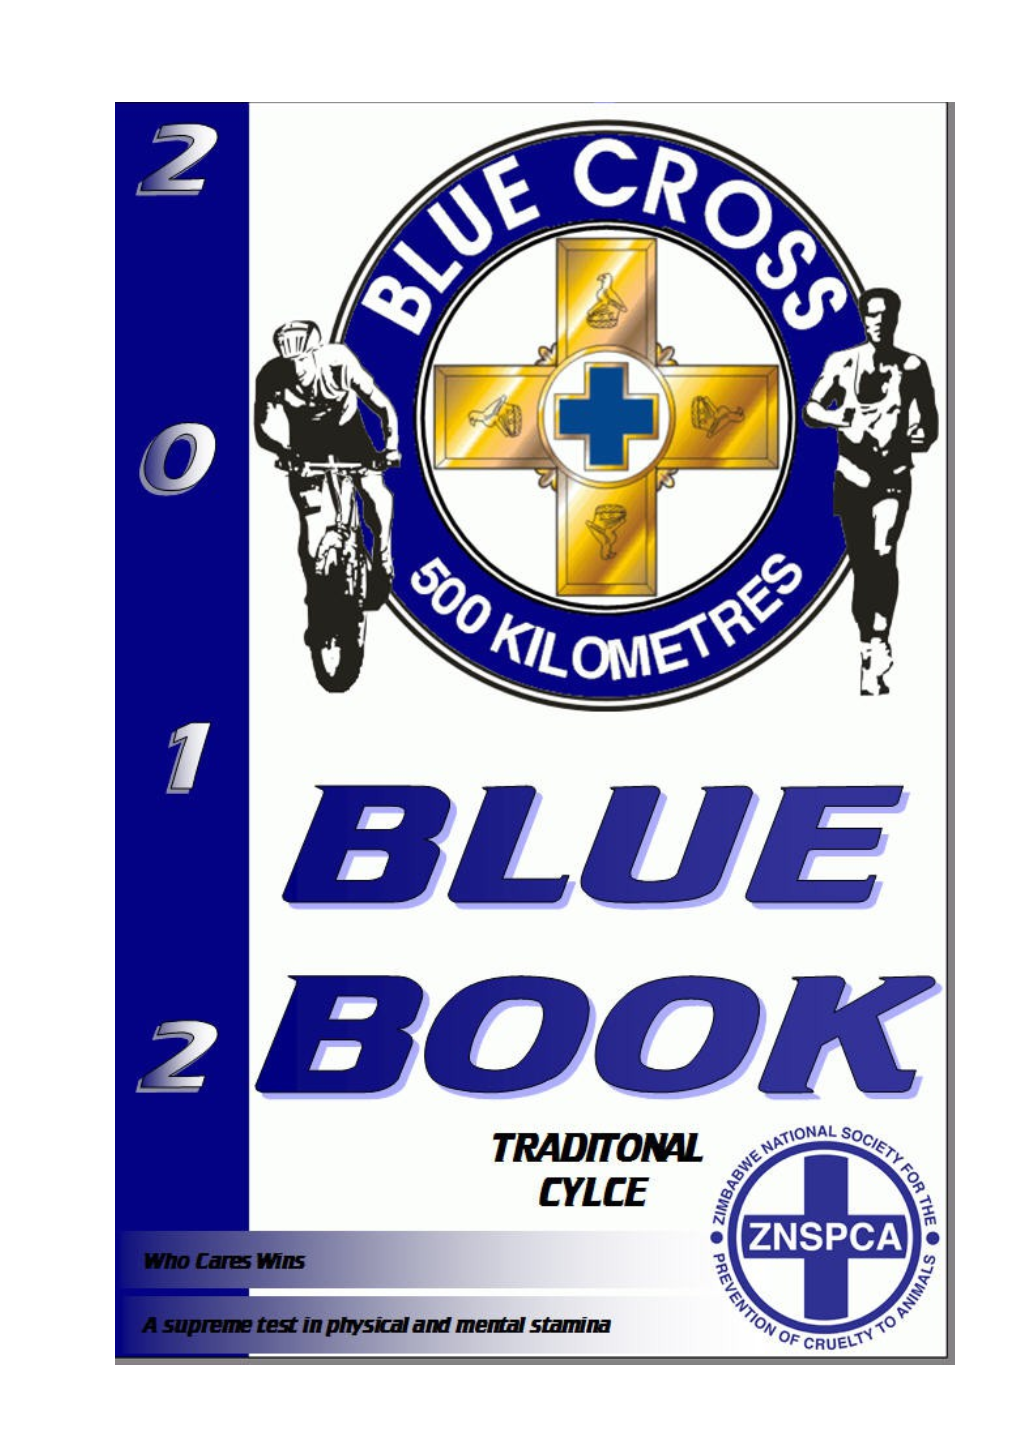 The Blue Cross Was Born from an Argument That Colin Anderson, the Founder Had in a Bar